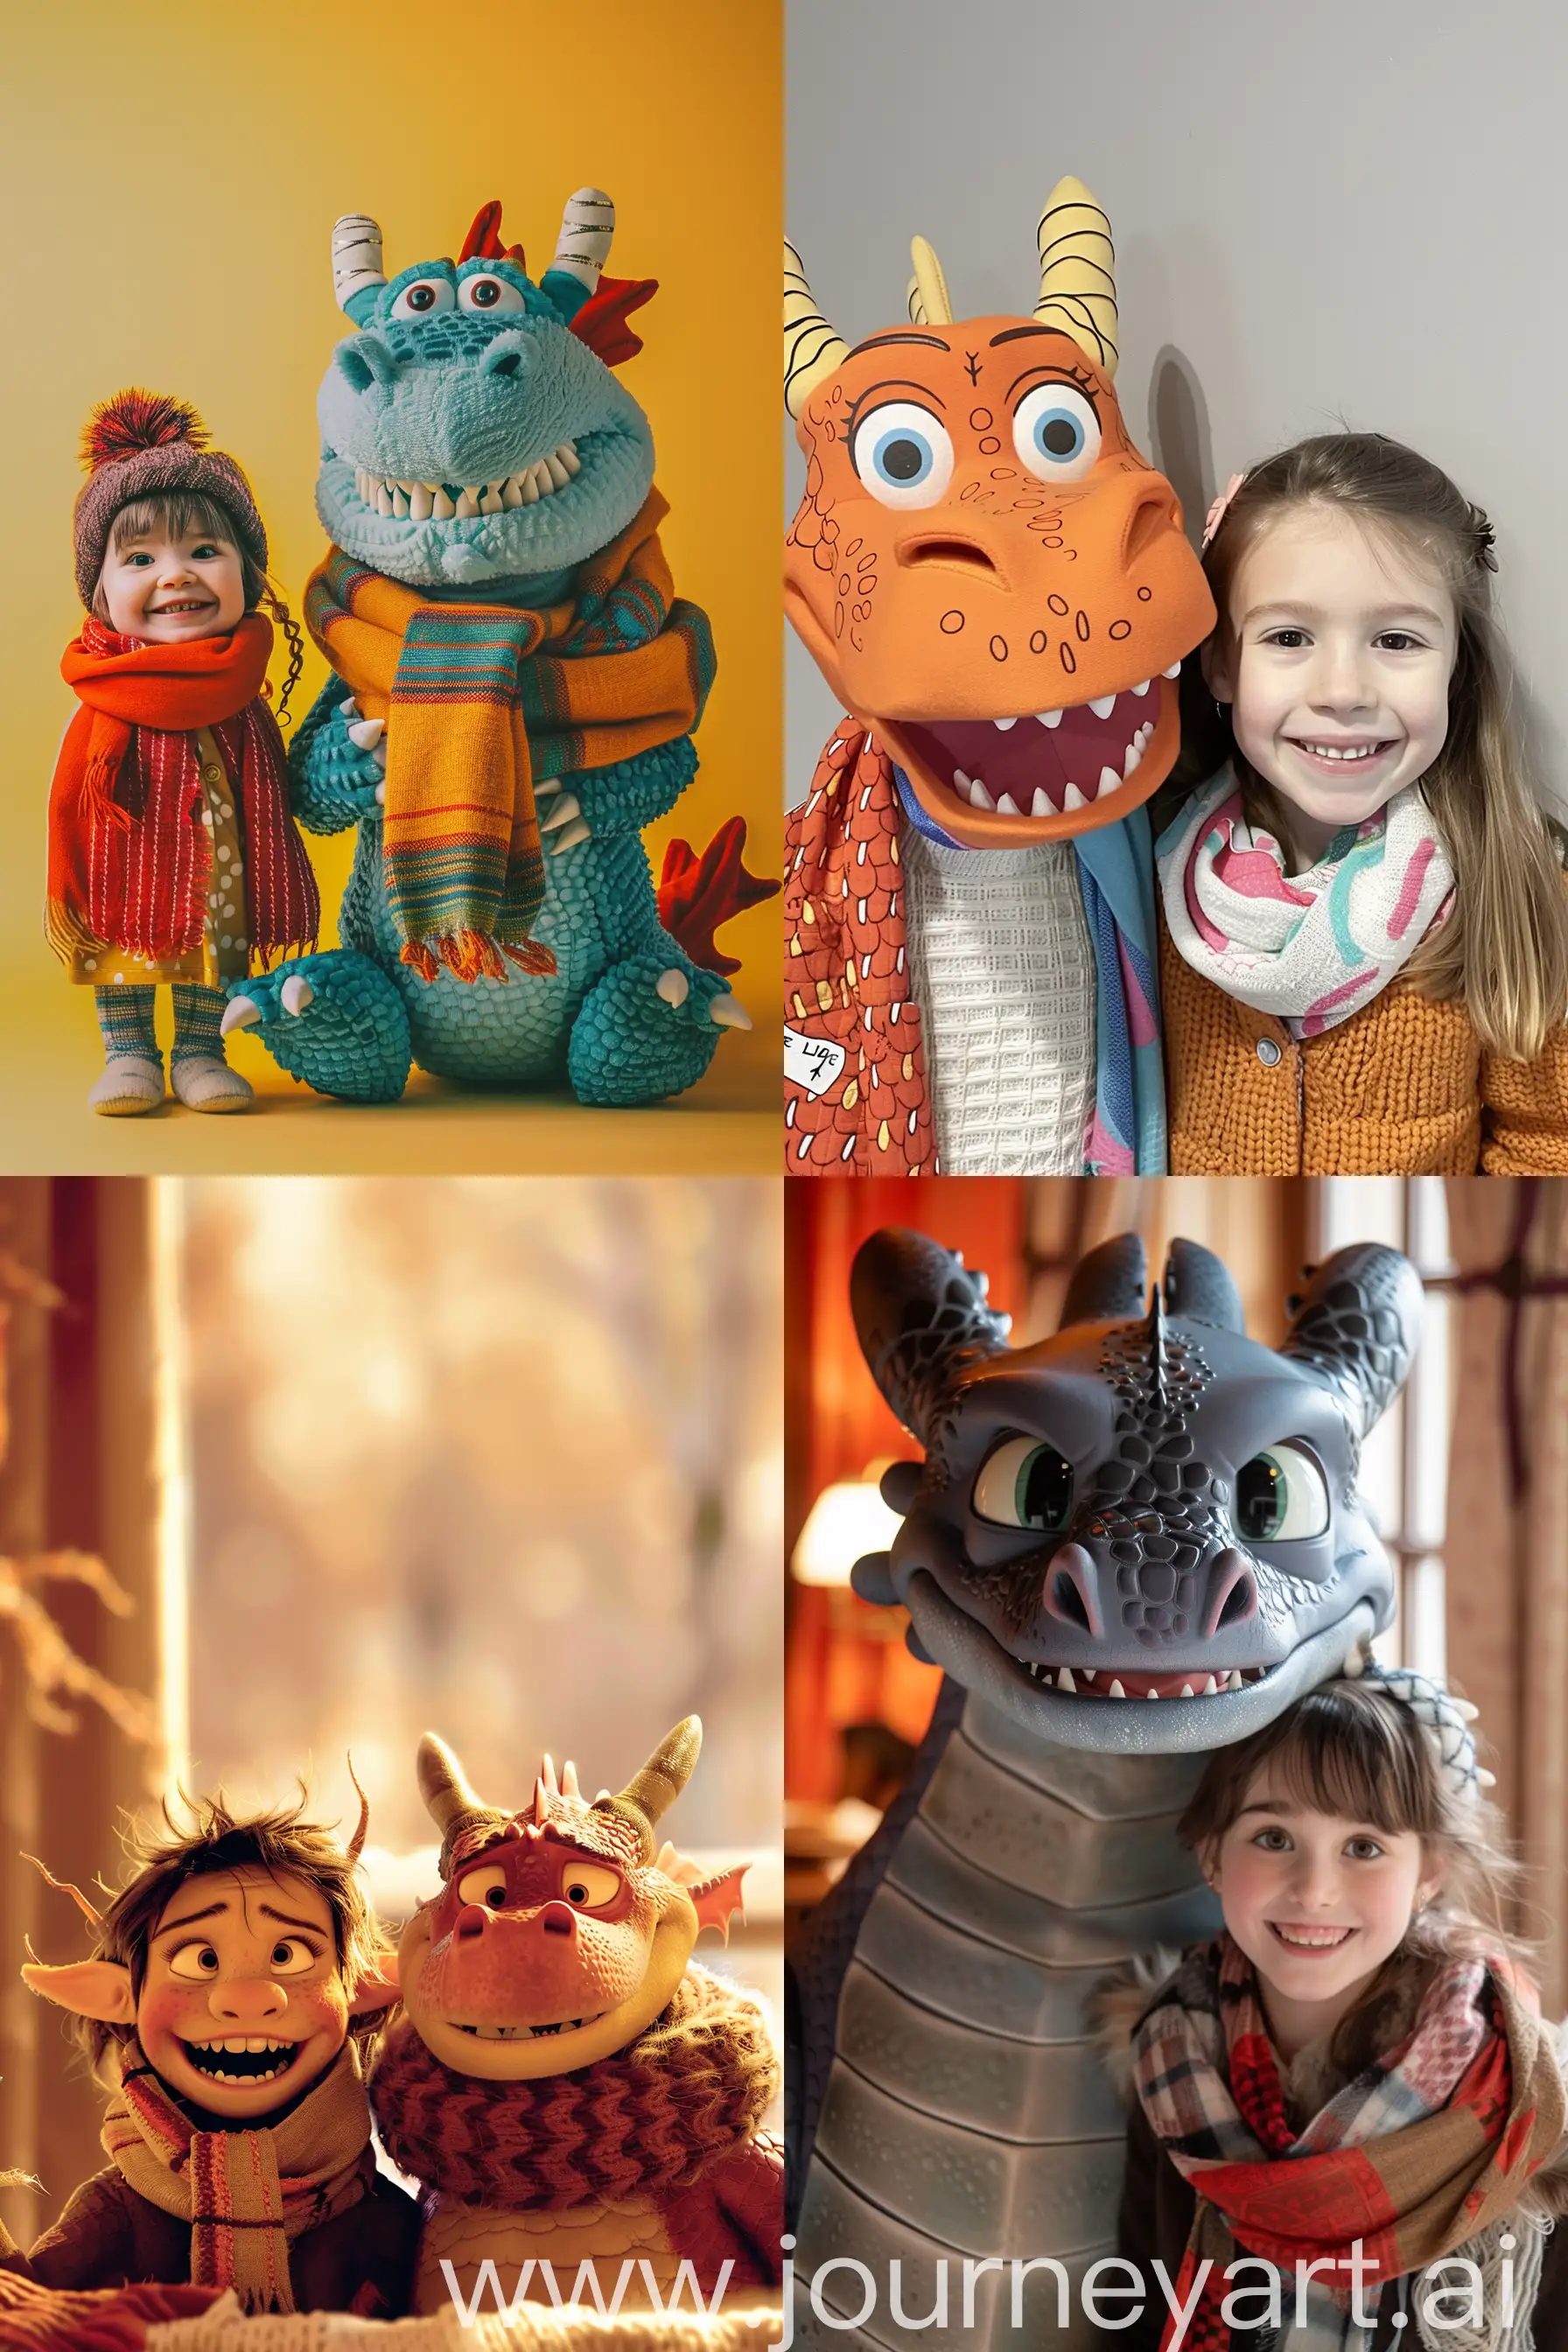 Joyful-Cartoon-Dragon-and-Girl-in-Cozy-Scarves-Smiling-Together